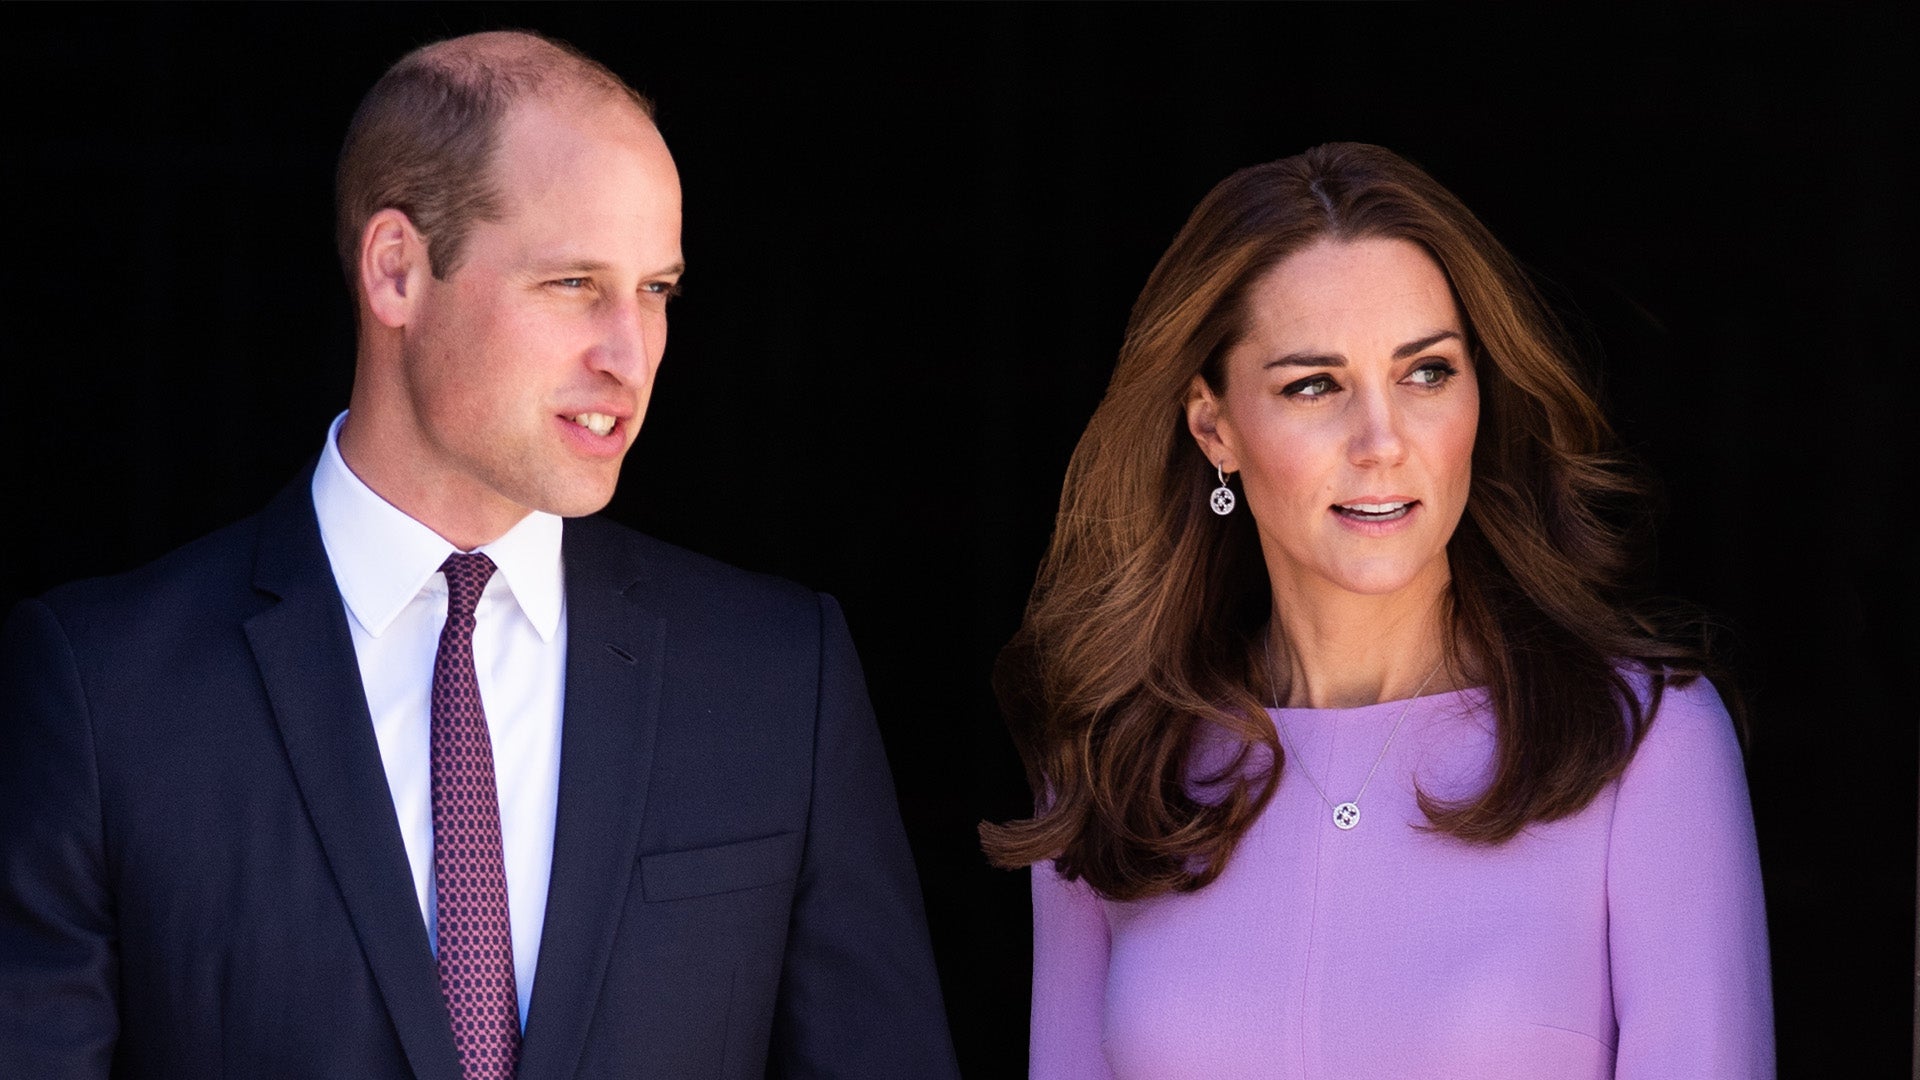 What Kate Middleton & Prince William Think About Conspiracy Theories Surrounding Them: Royal Expert